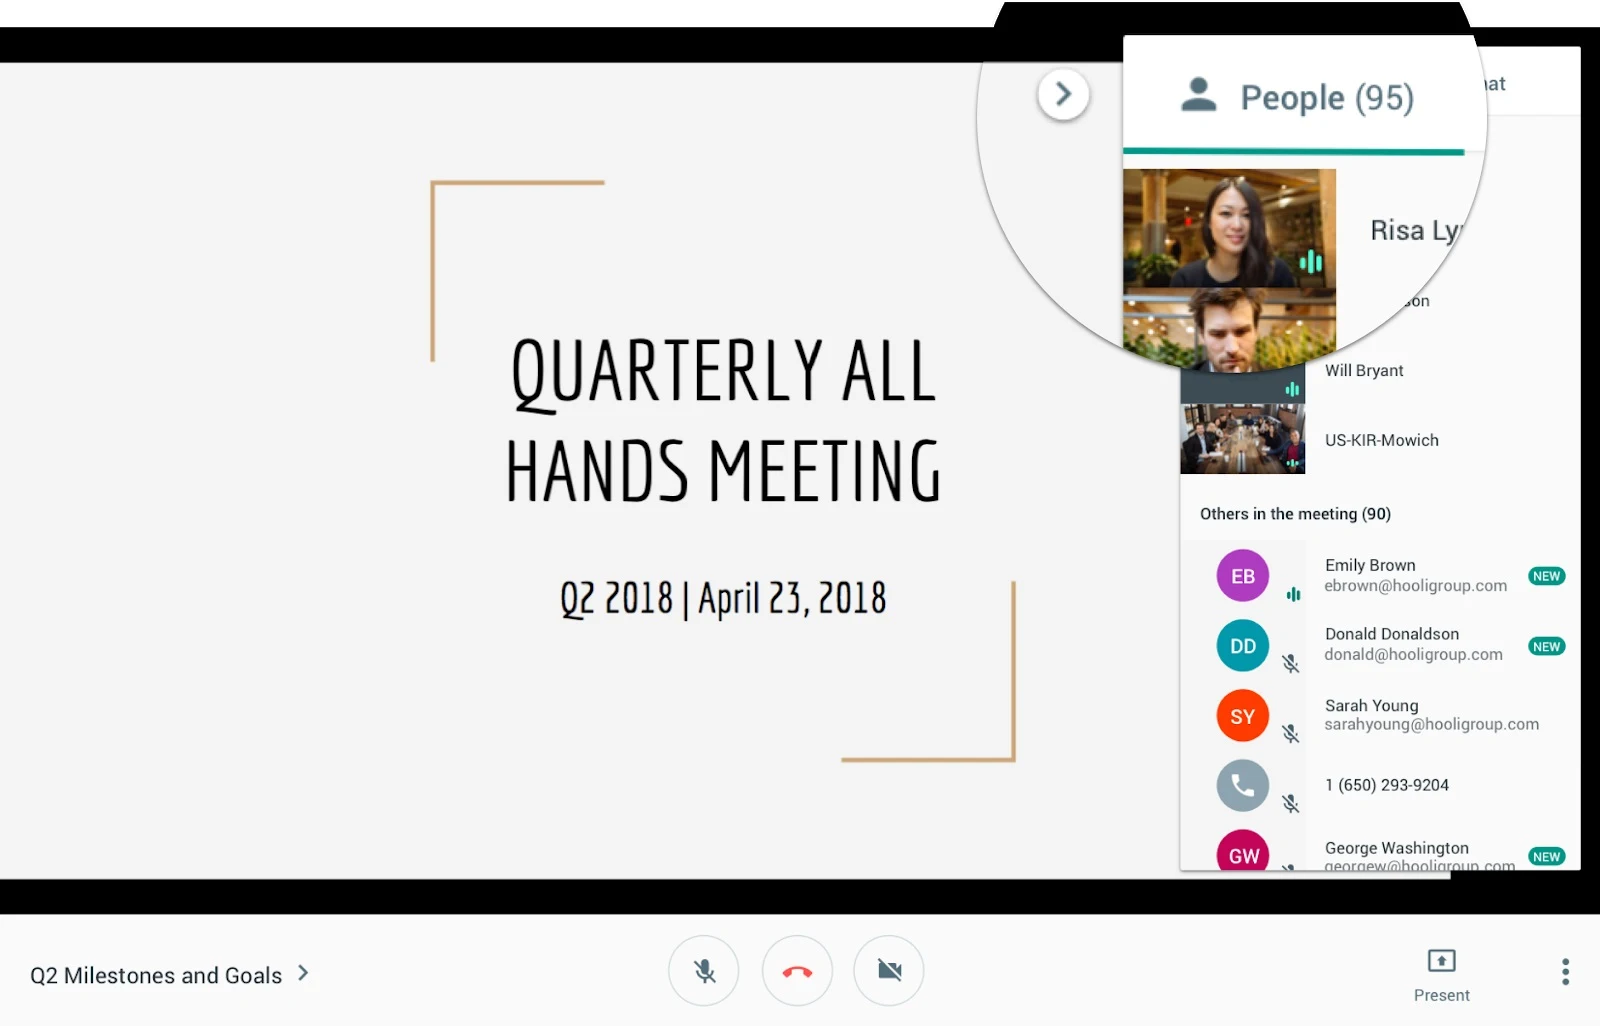 Google’s Hangouts Meet now supports up to 100 participants